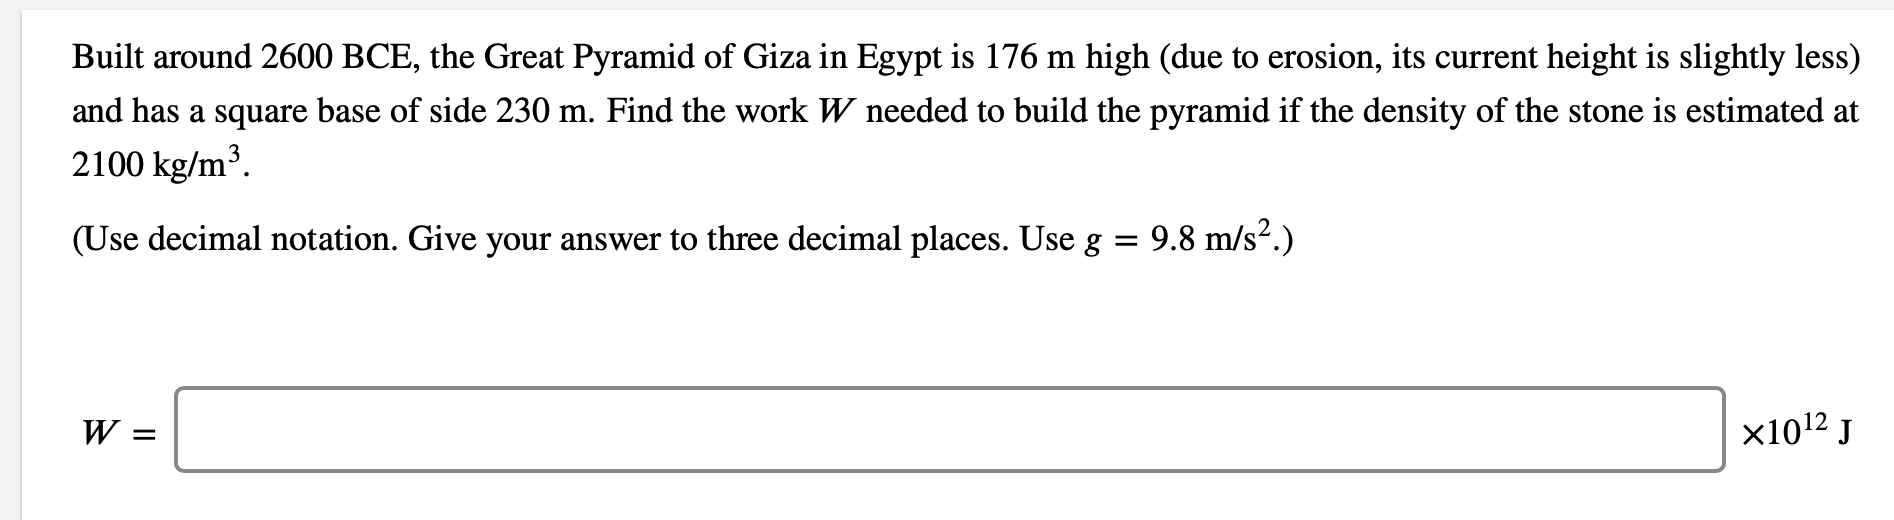 Built around 2600 BCE, the Great Pyramid of Giza in Egypt is 176 m high (due to erosion, its current height is slightly less)
and has a square base of side 230 m. Find the work W needed to build the pyramid if the density of the stone is estimated at
2100 kg/m³.
(Use decimal notation. Give your answer to three decimal places. Use g = 9.8 m/s².)
W =
x1012 J
